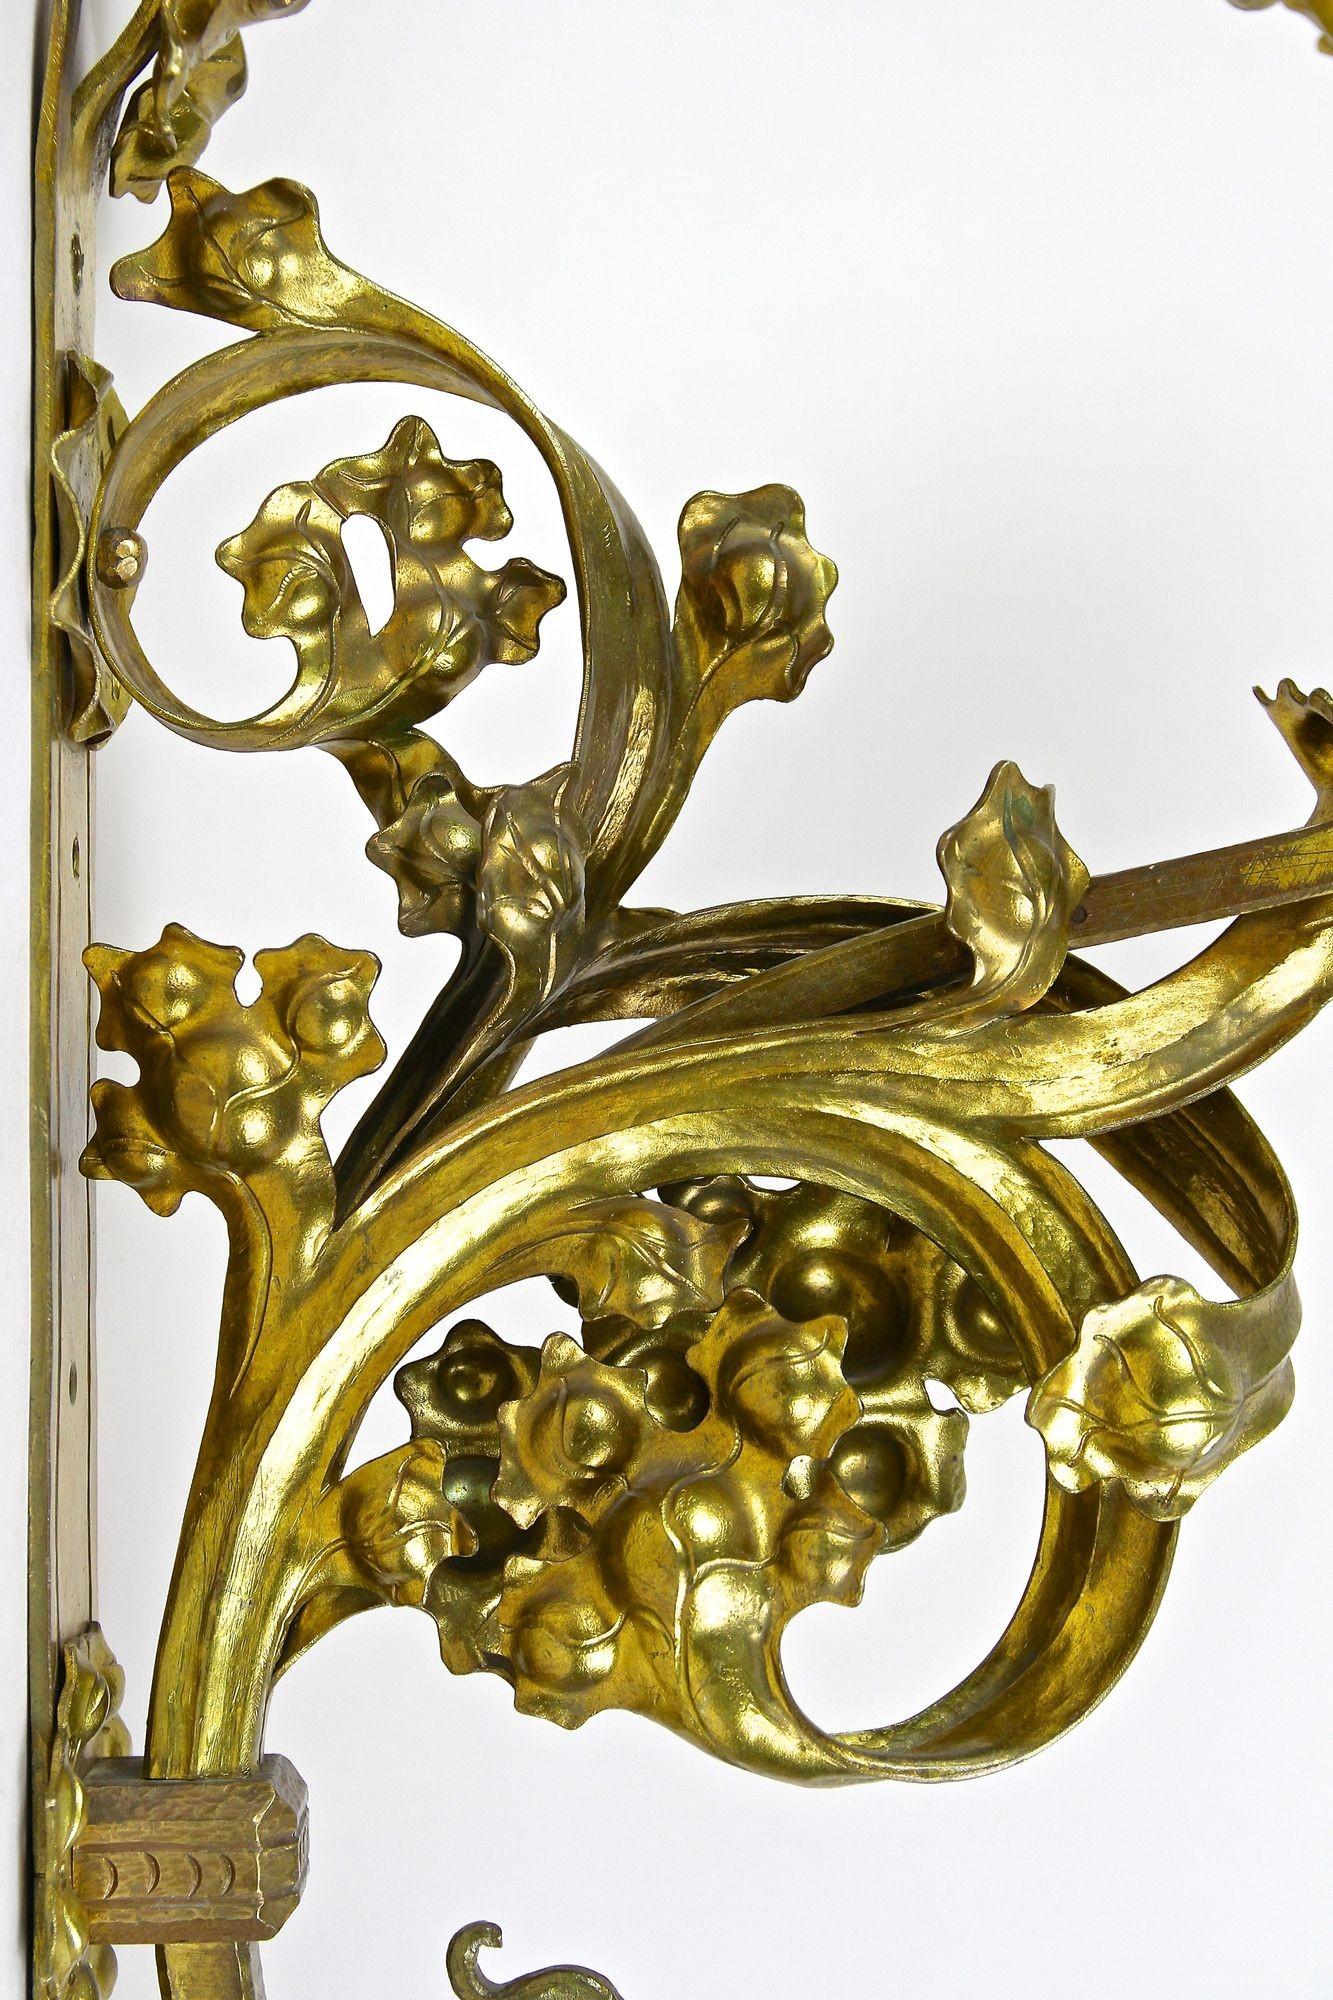 Hand-Crafted Pair Of 19th Century Gilt Baroque Candle Wall Sconces, Austria circa 1890 For Sale